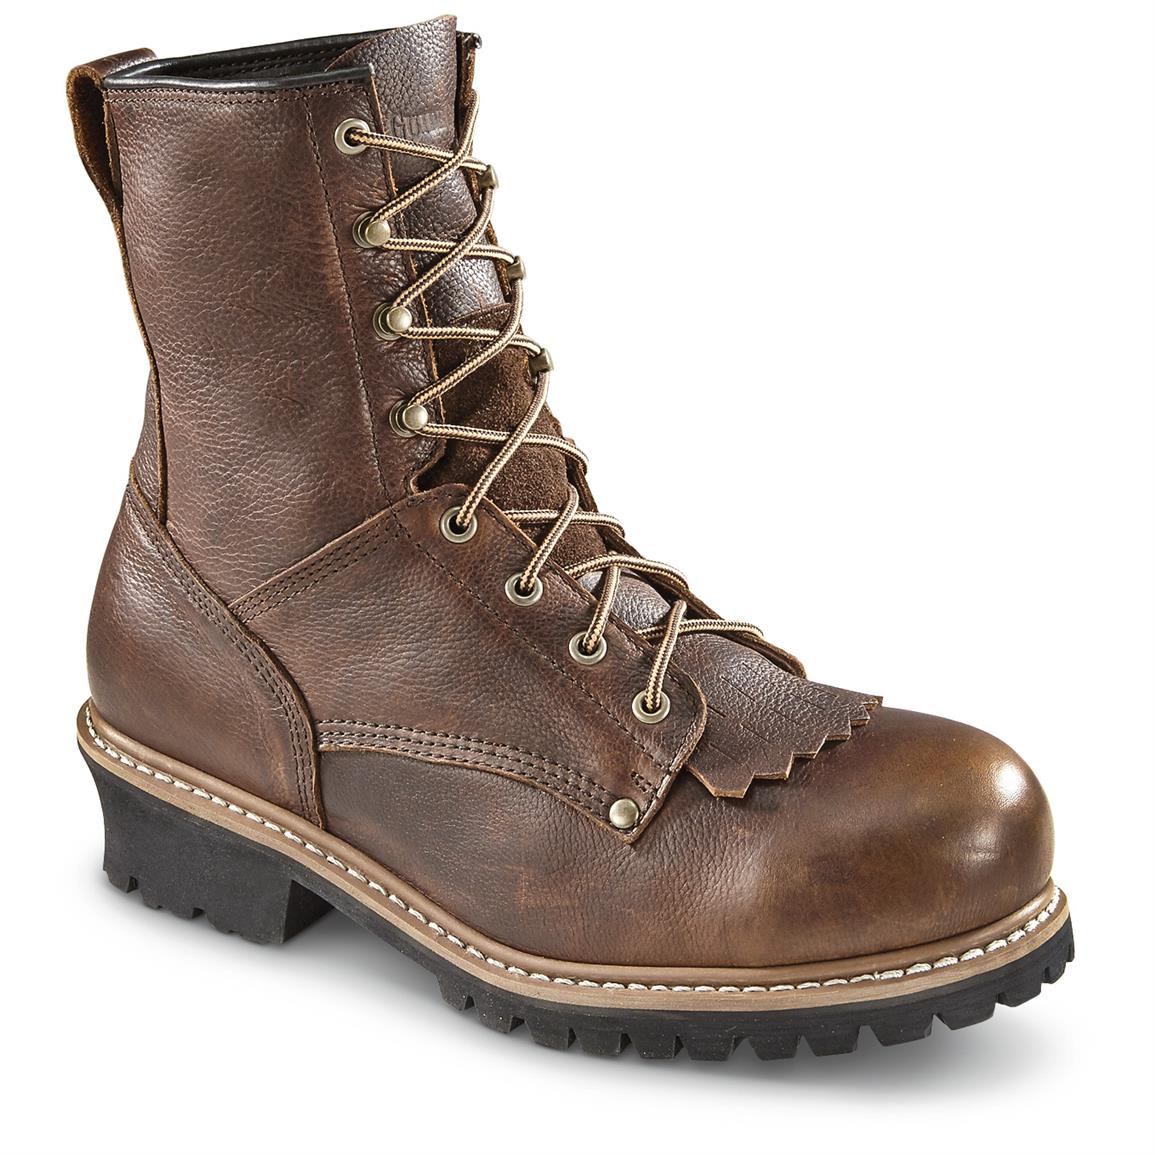 Guide Gear Men's Sawtooth Logger Boots, Brown